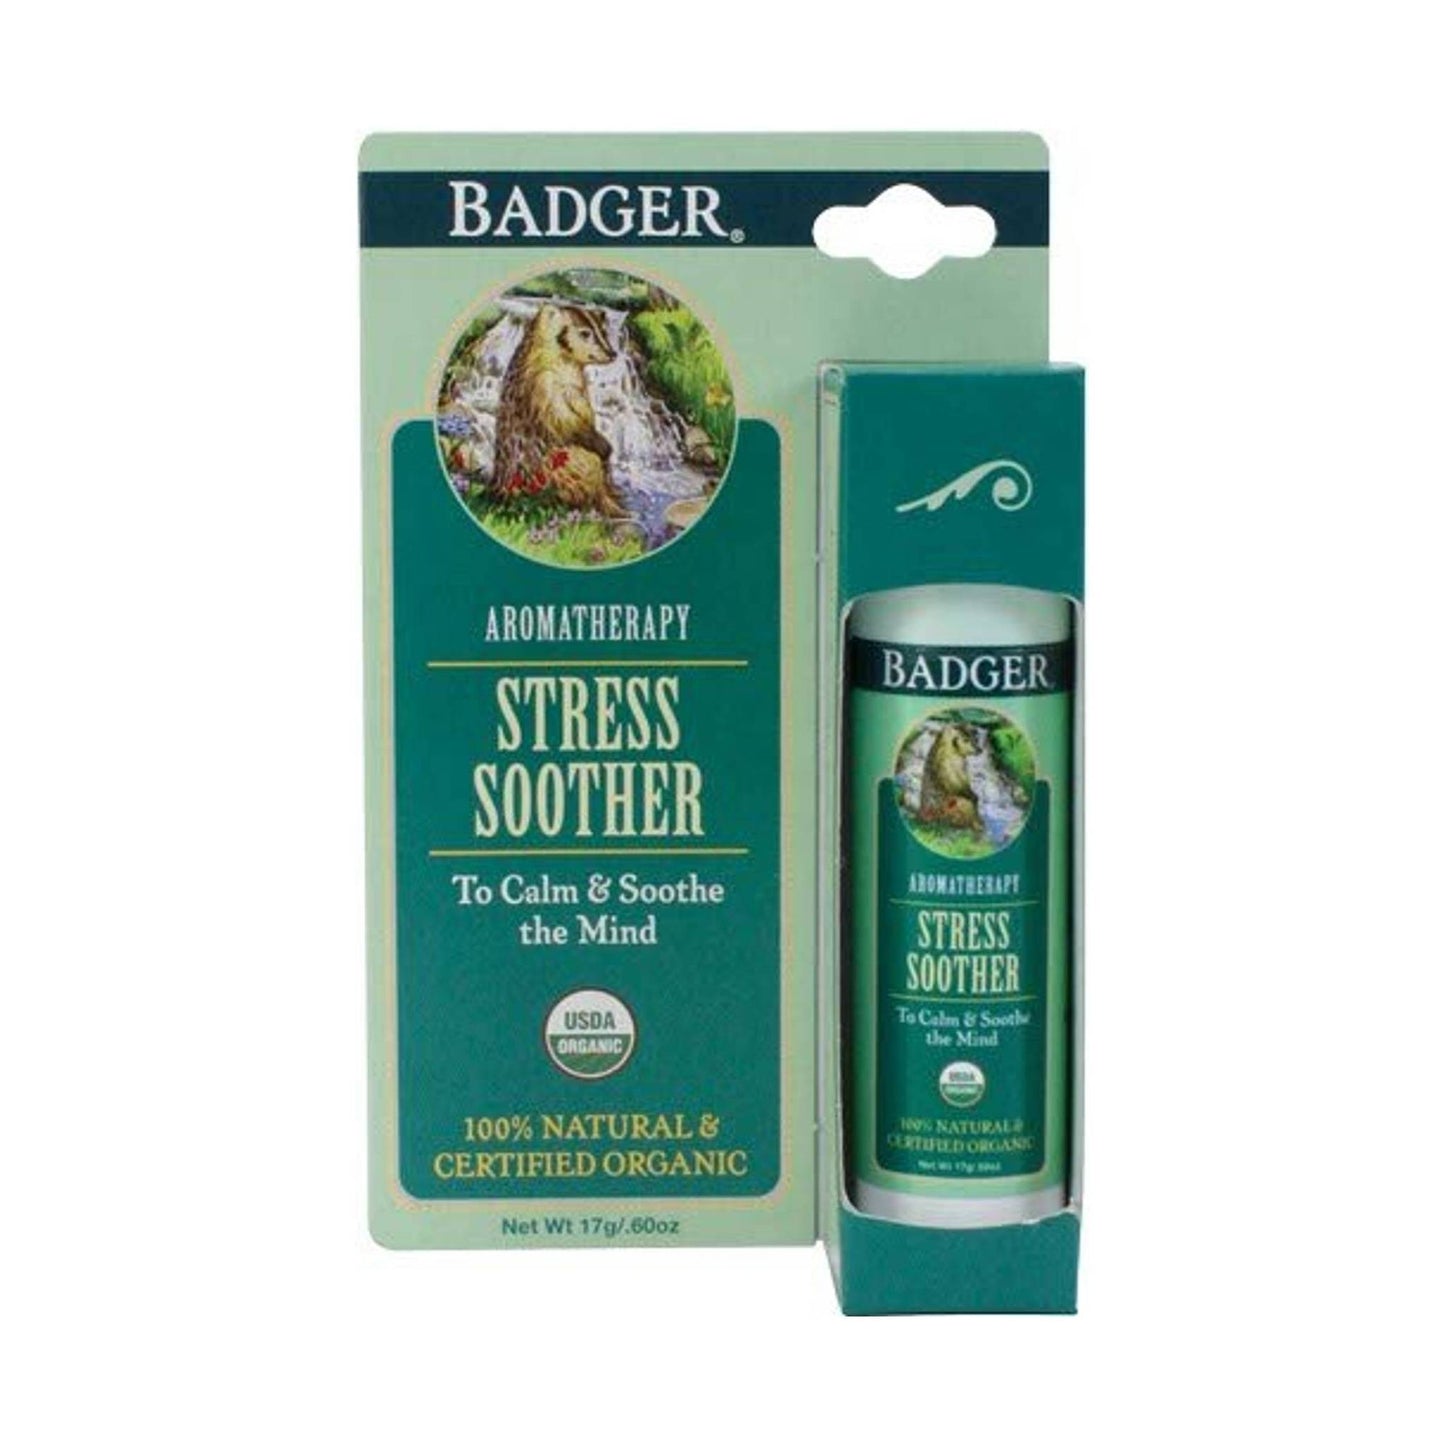 Badger Stress Soother